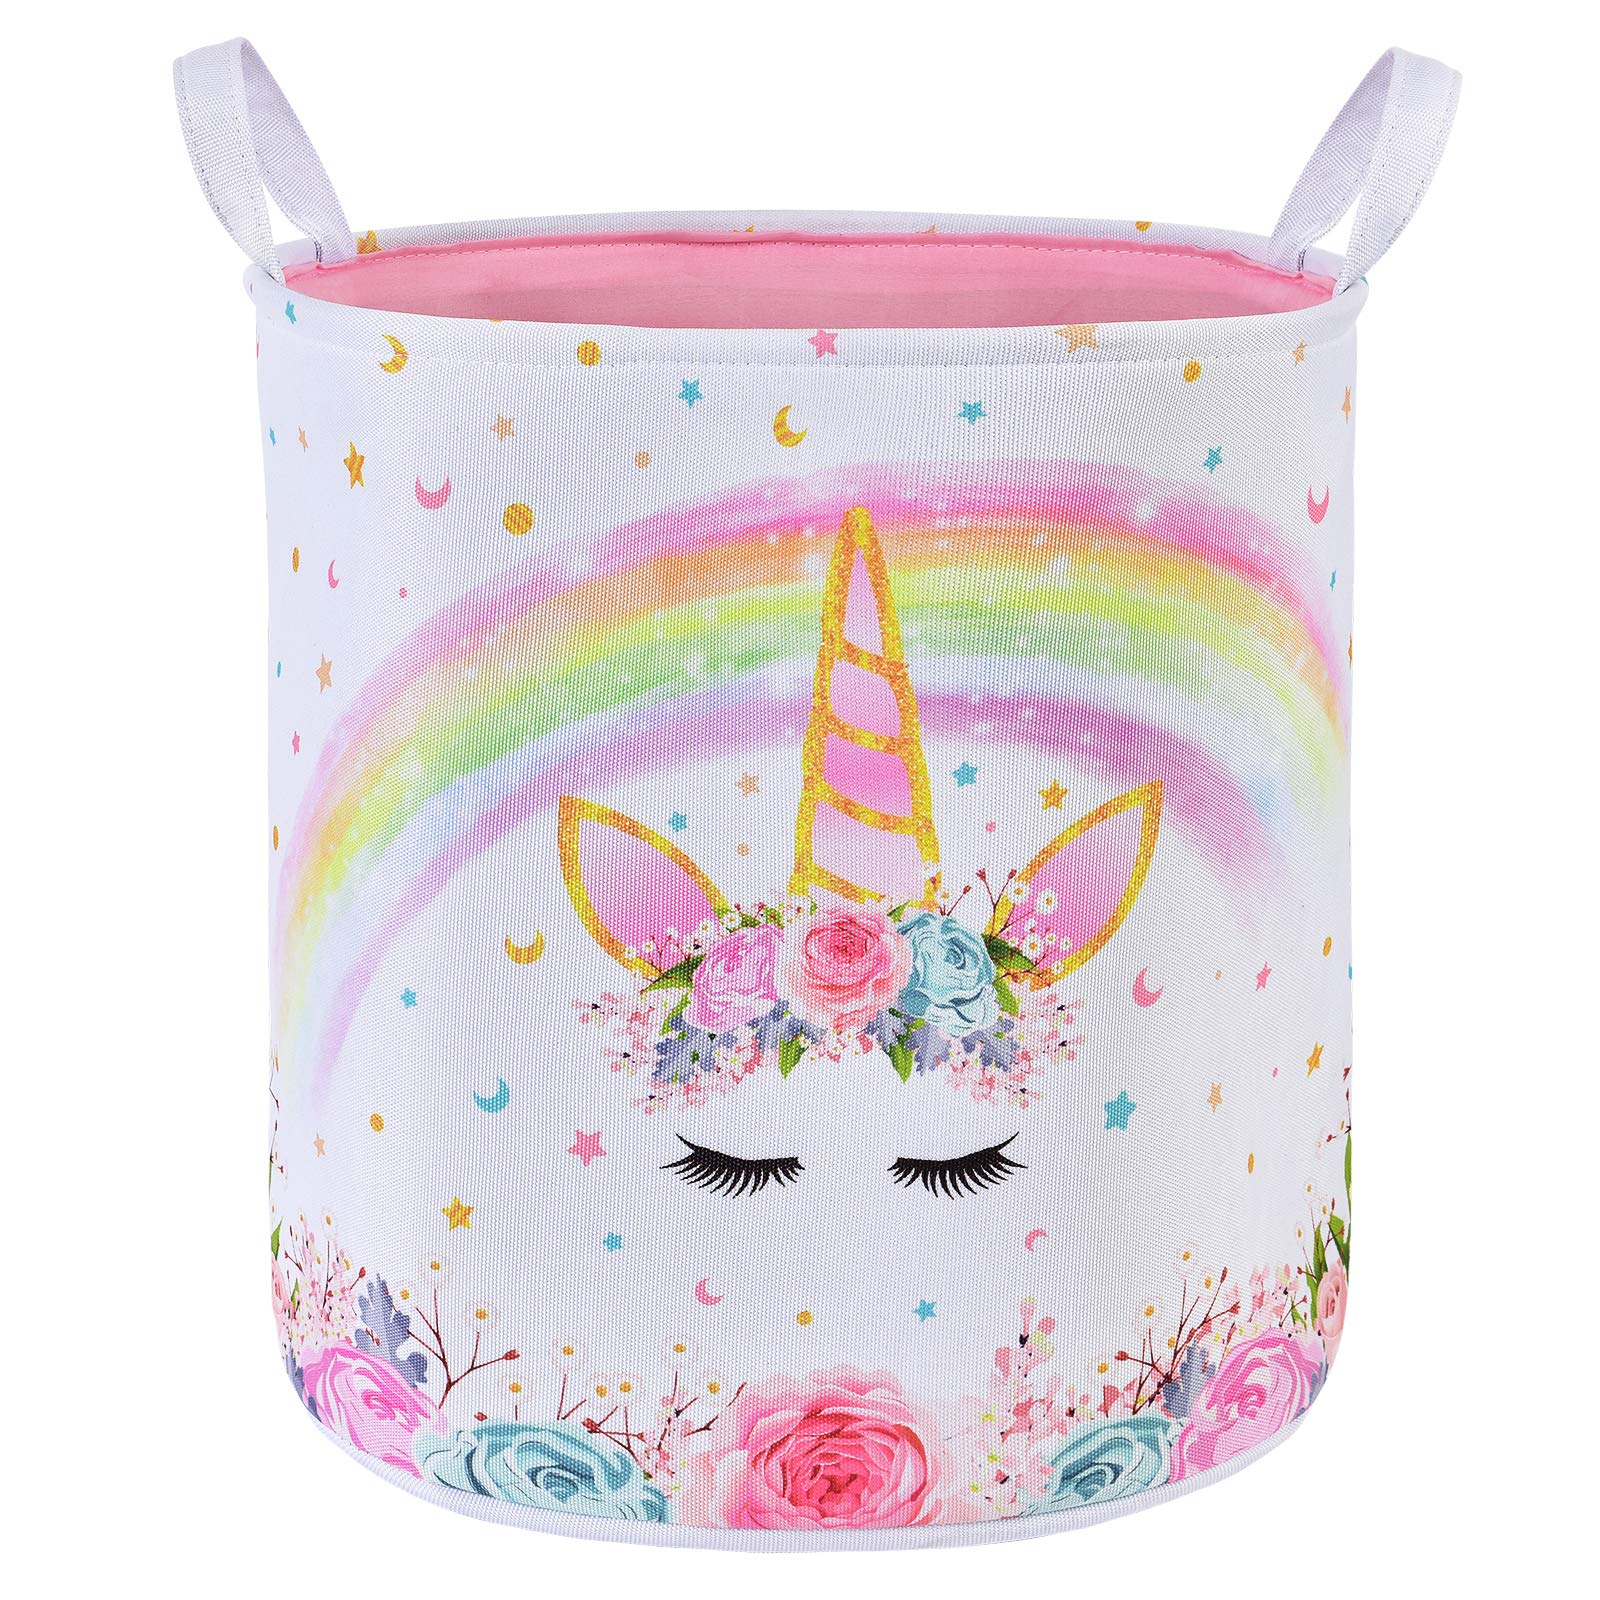 Unicorn Laundry Hamper - Fold-able Storage Bins Laundry Storage Basket for Kids Baby Gift Baskets Toys Clothes Shoes Bedroom Home Organizer Nursery Hampers